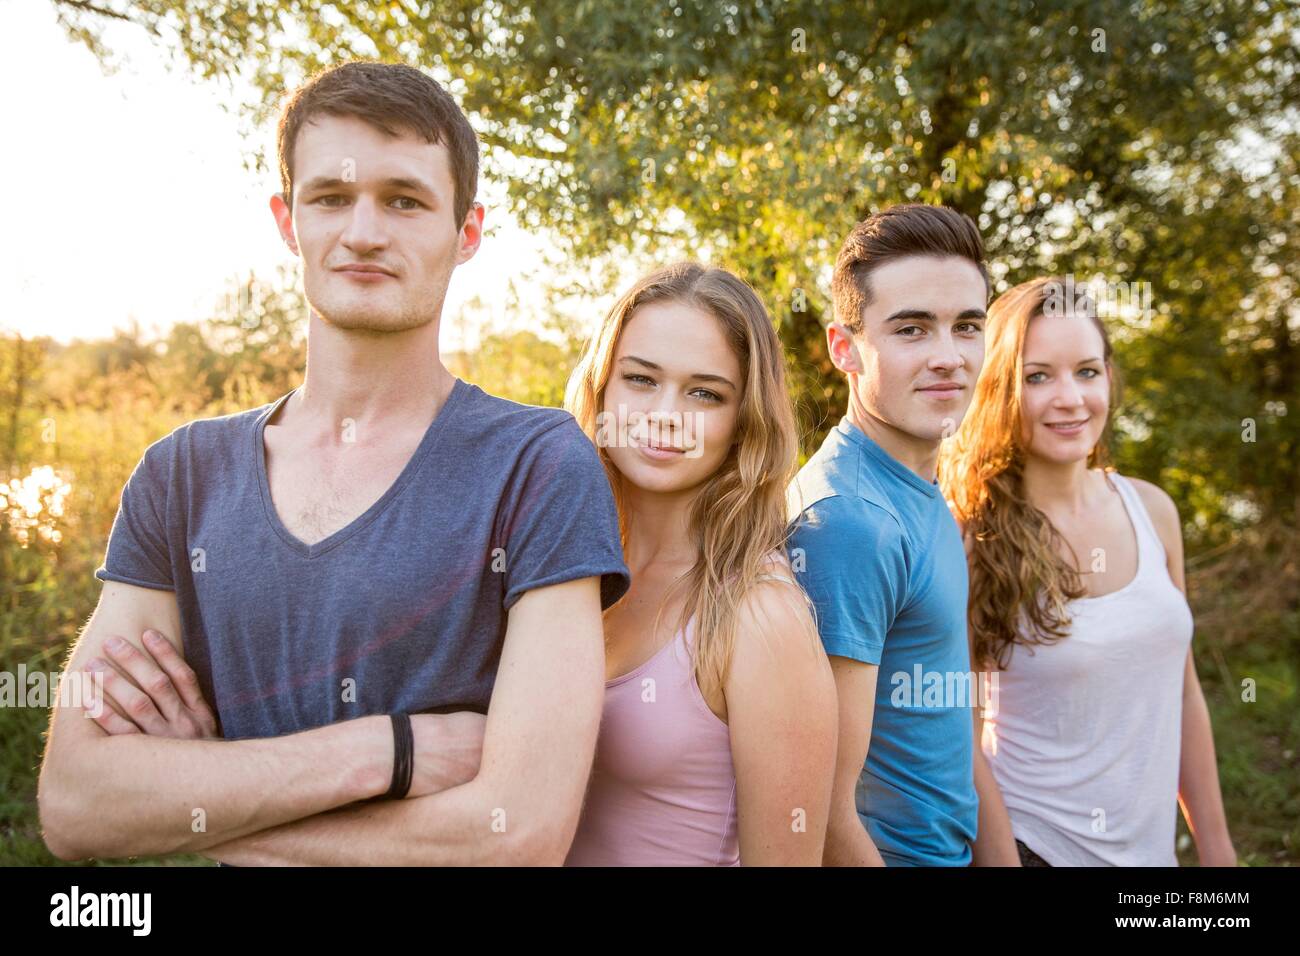 Portrait of group of friends in rural environment, smiling Stock Photo